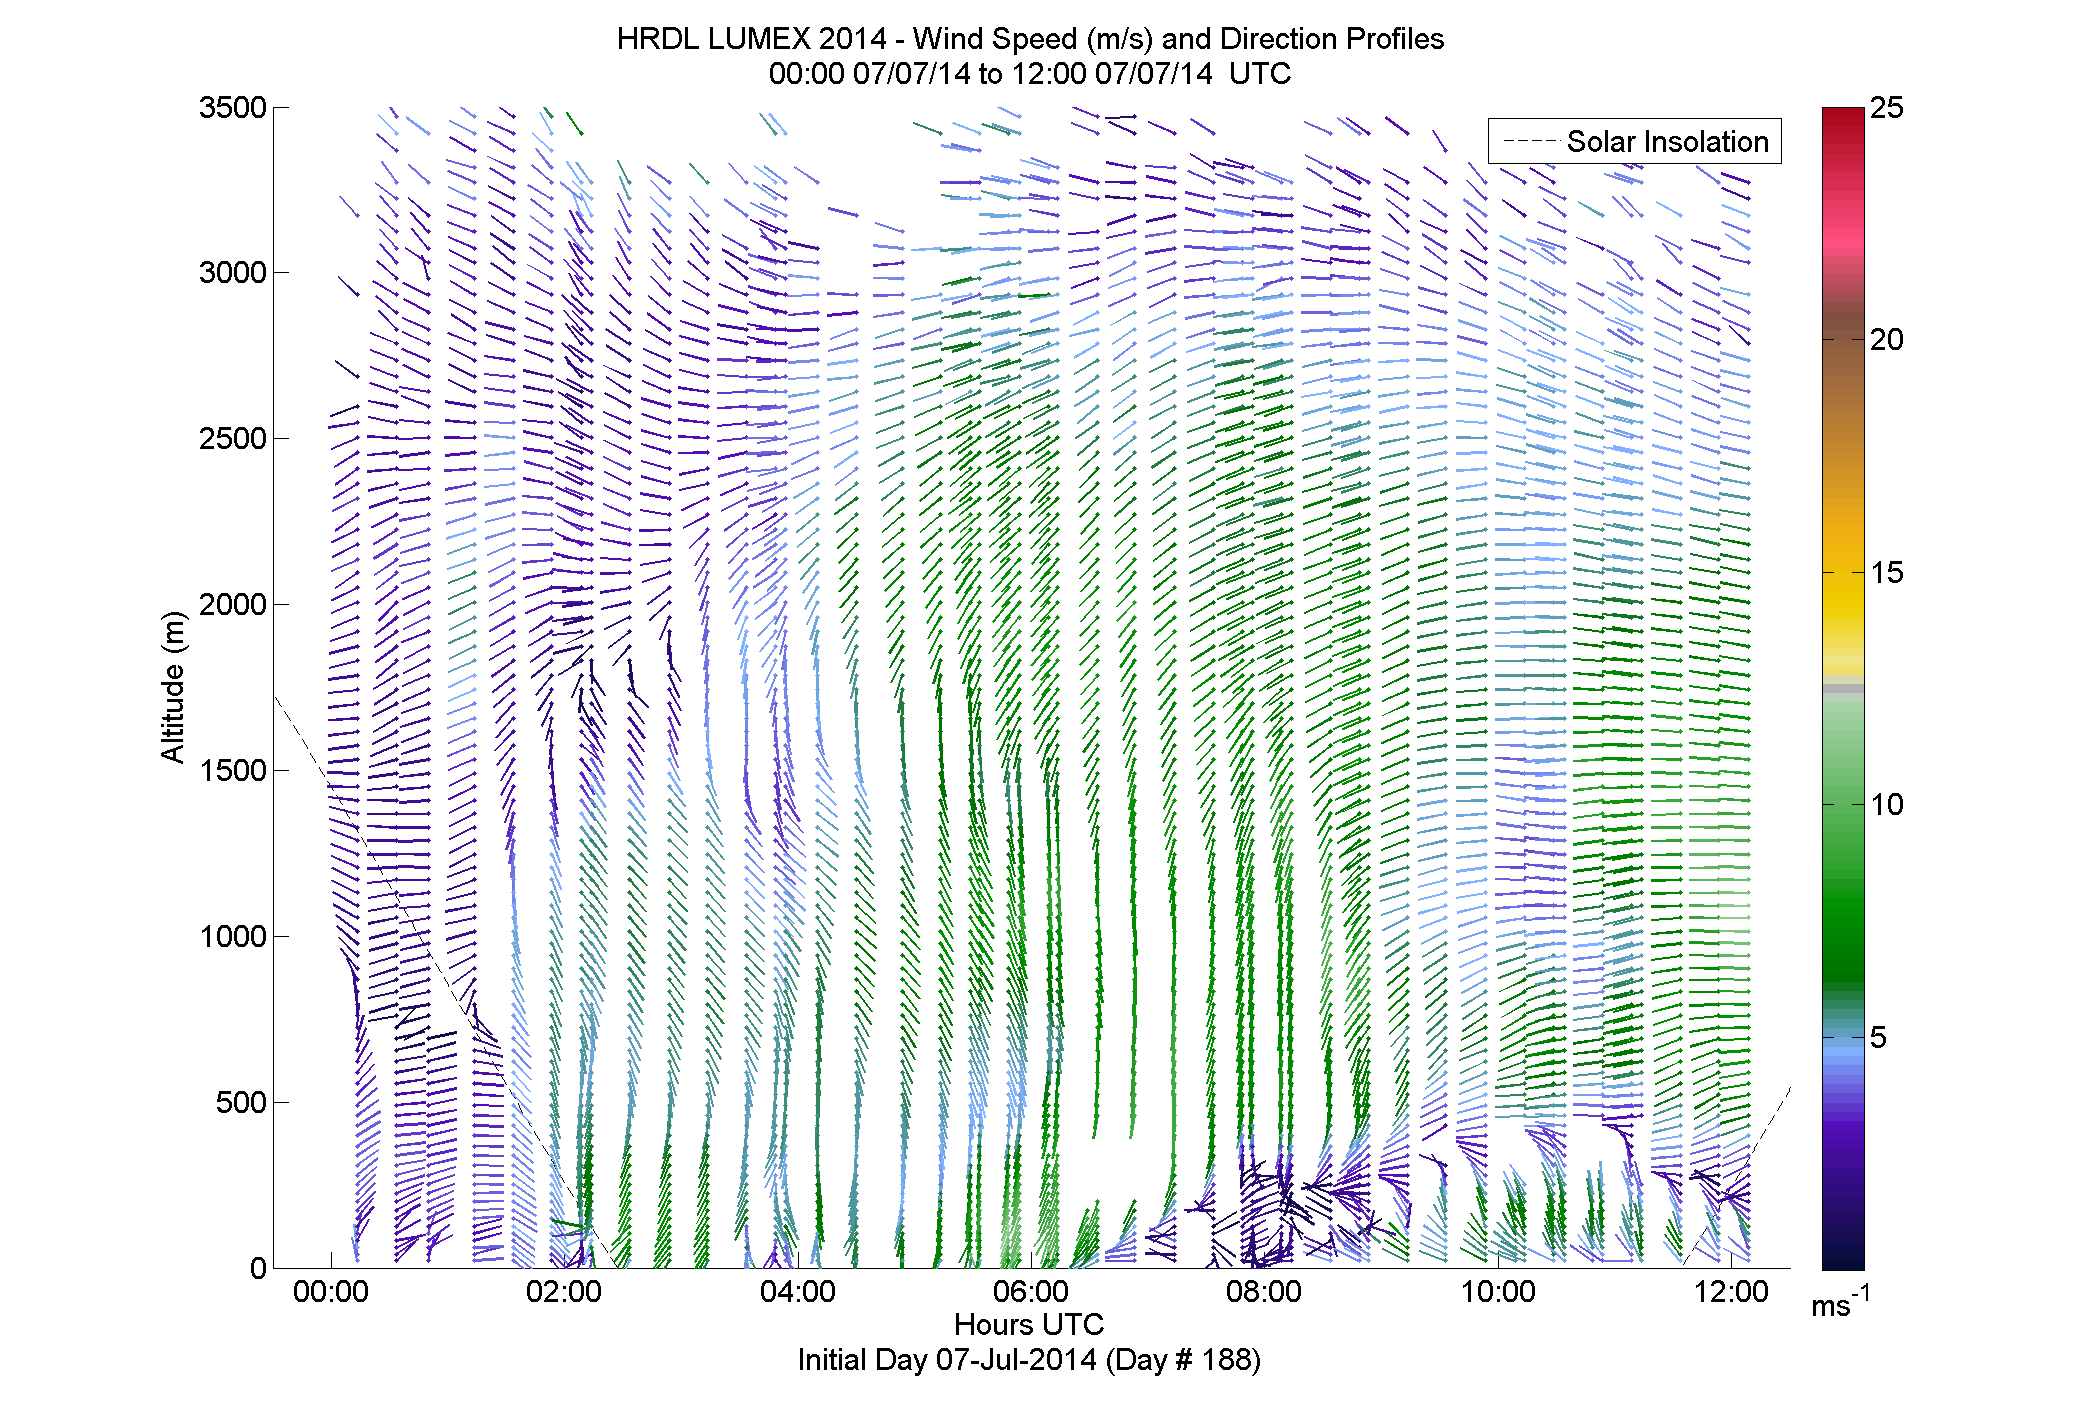 HRDL speed and direction profile - July 7 am